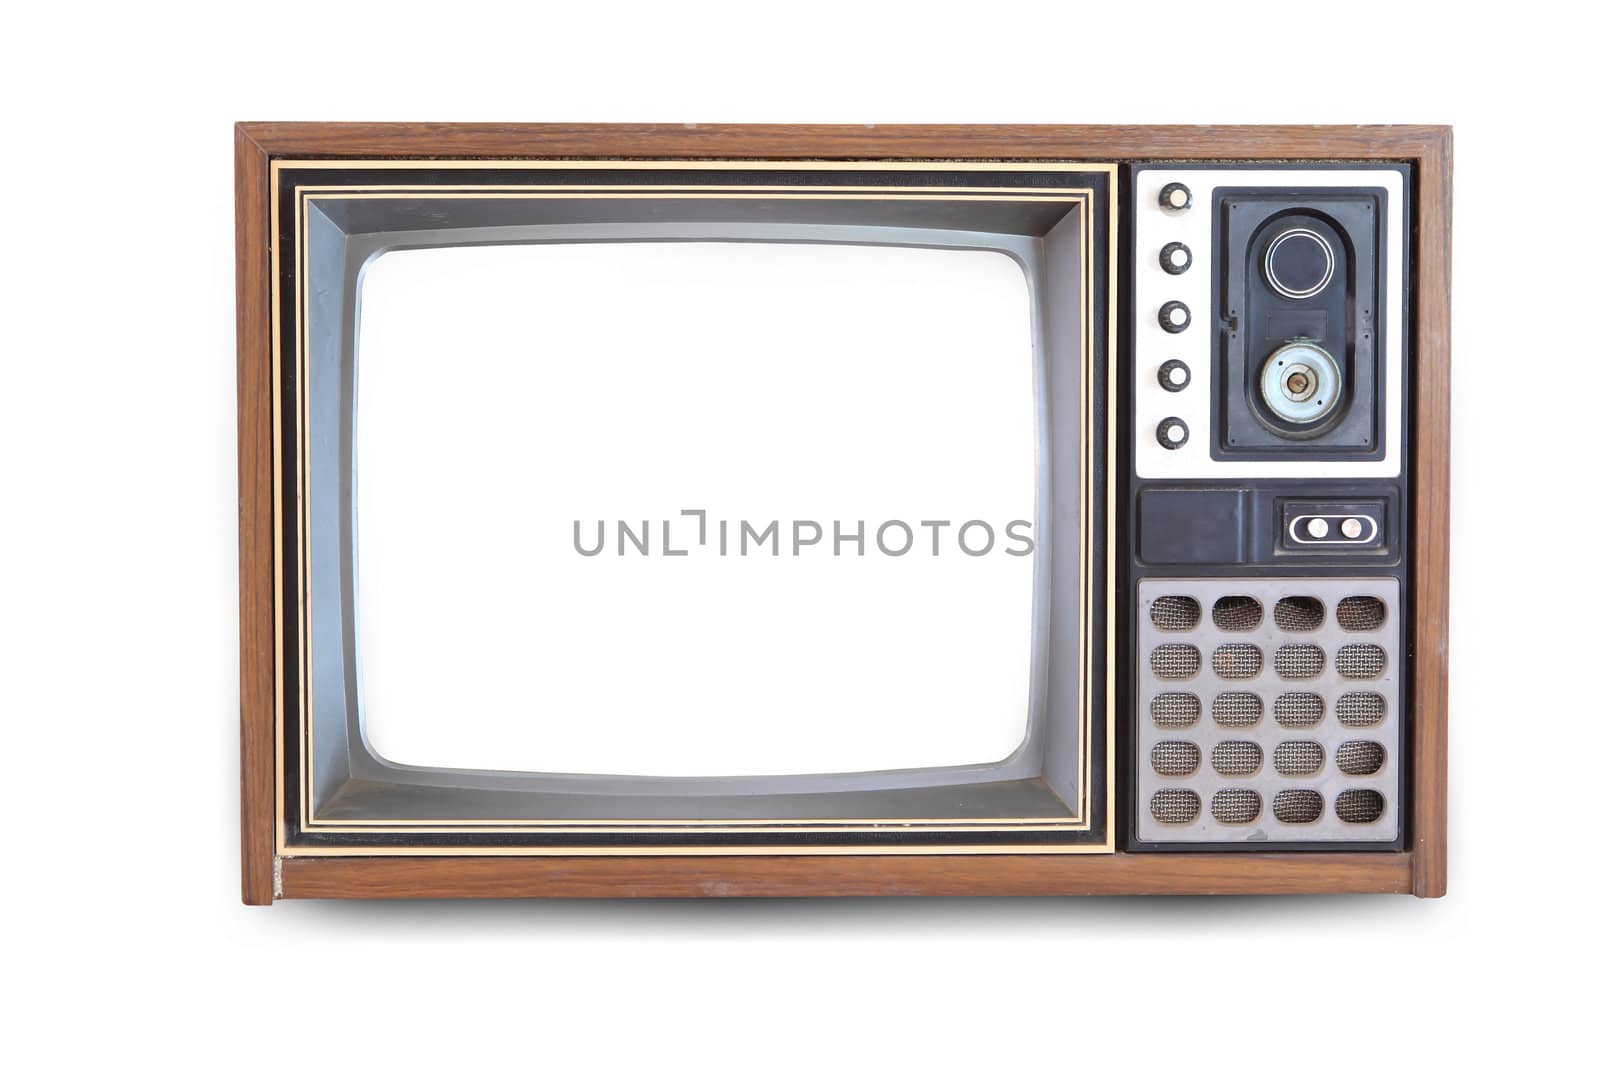 The old TV on the isolated white background by rufous